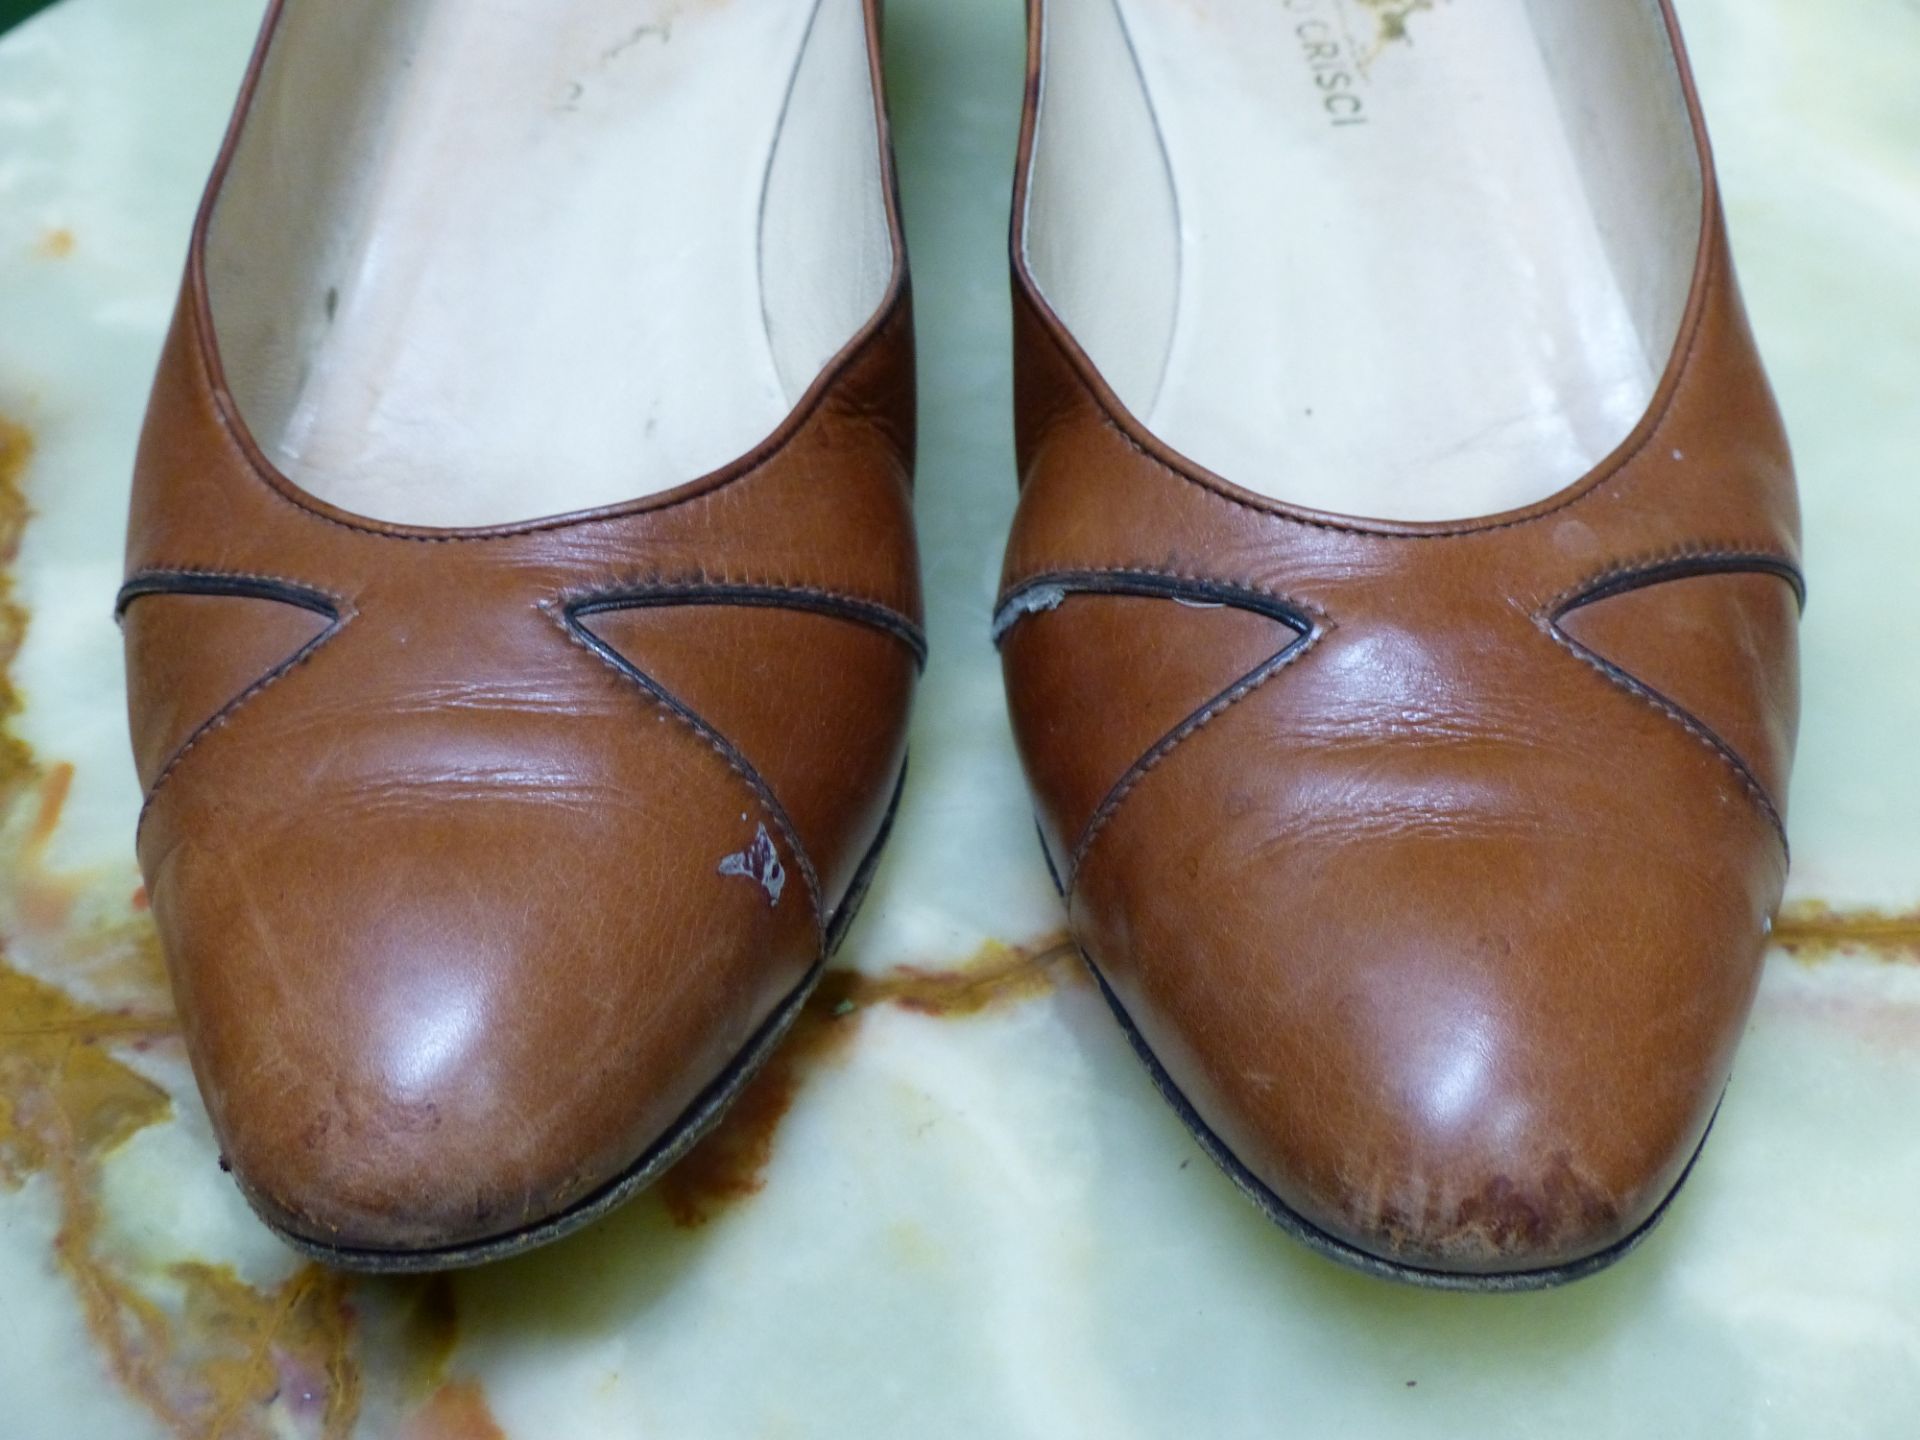 SHOES. UNUTZER BURGUNDY LOAFERS EUR SIZE 40 (BOX) CAPUCINE BROWN SUEDE HEALS UK SIZE 6, AND TANINO - Image 9 of 15